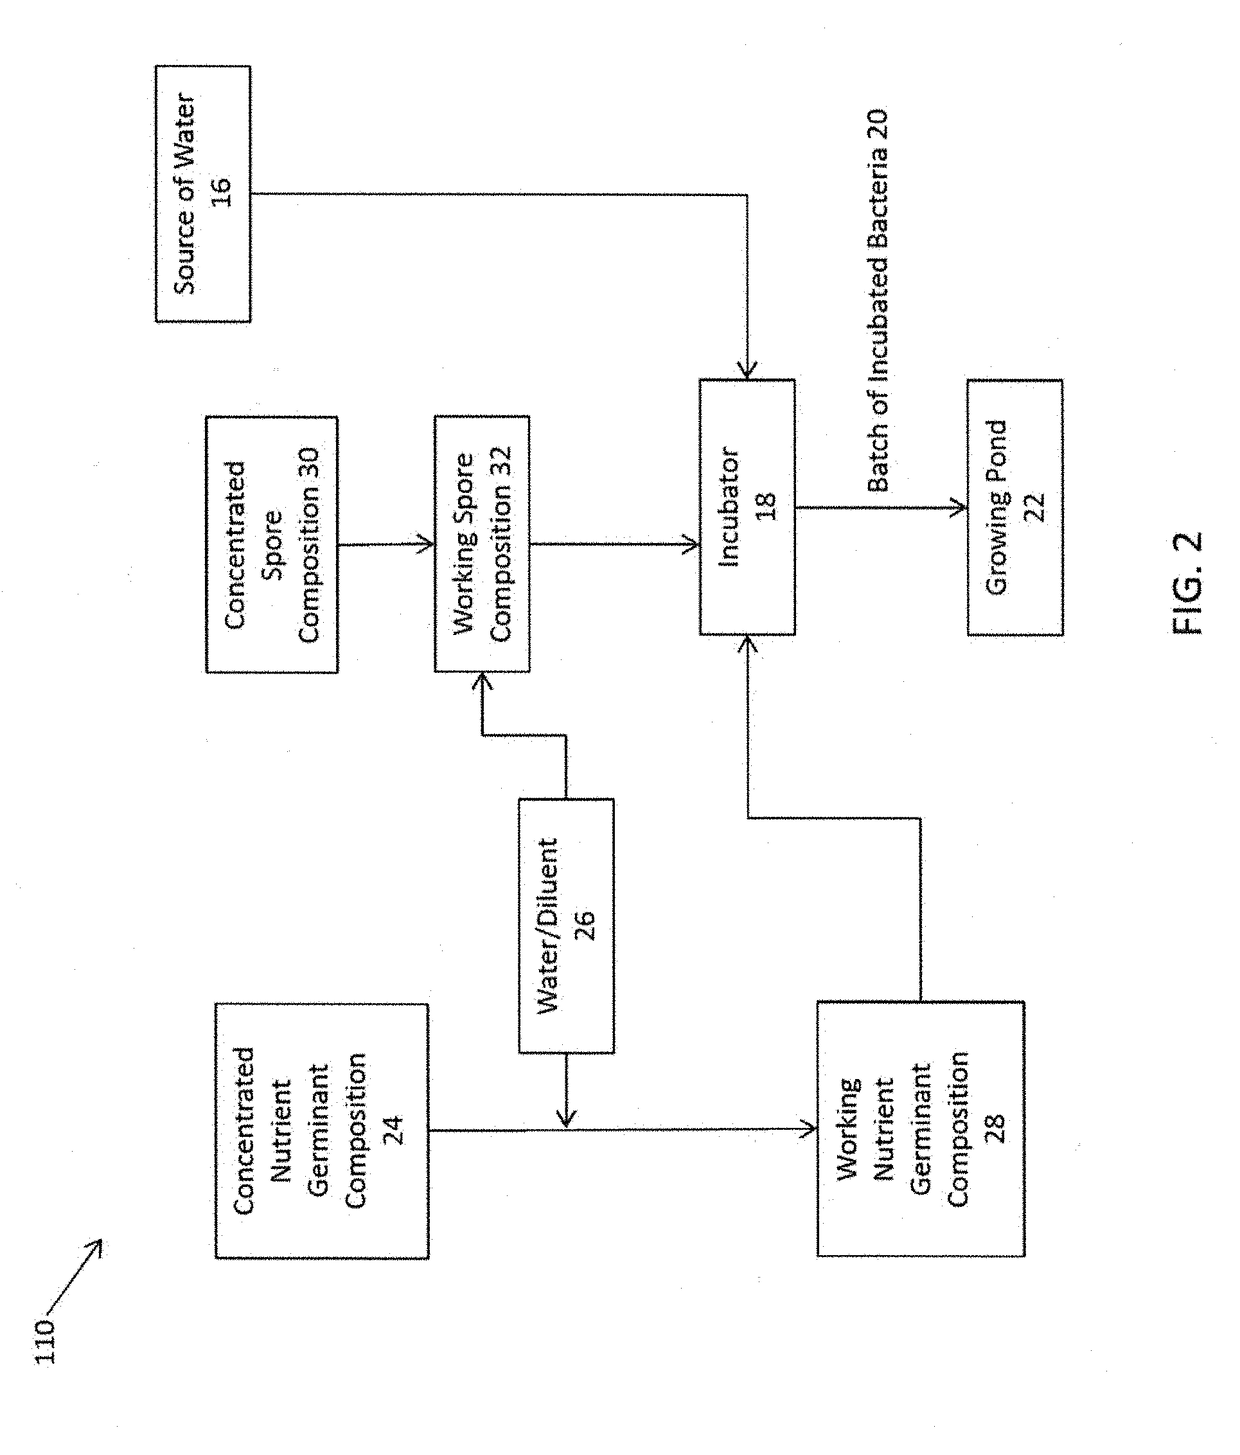 Method for Improving Quality of Aquaculture Pond Water Using a Nutrient Germinant Composition and Spore Incubation Method